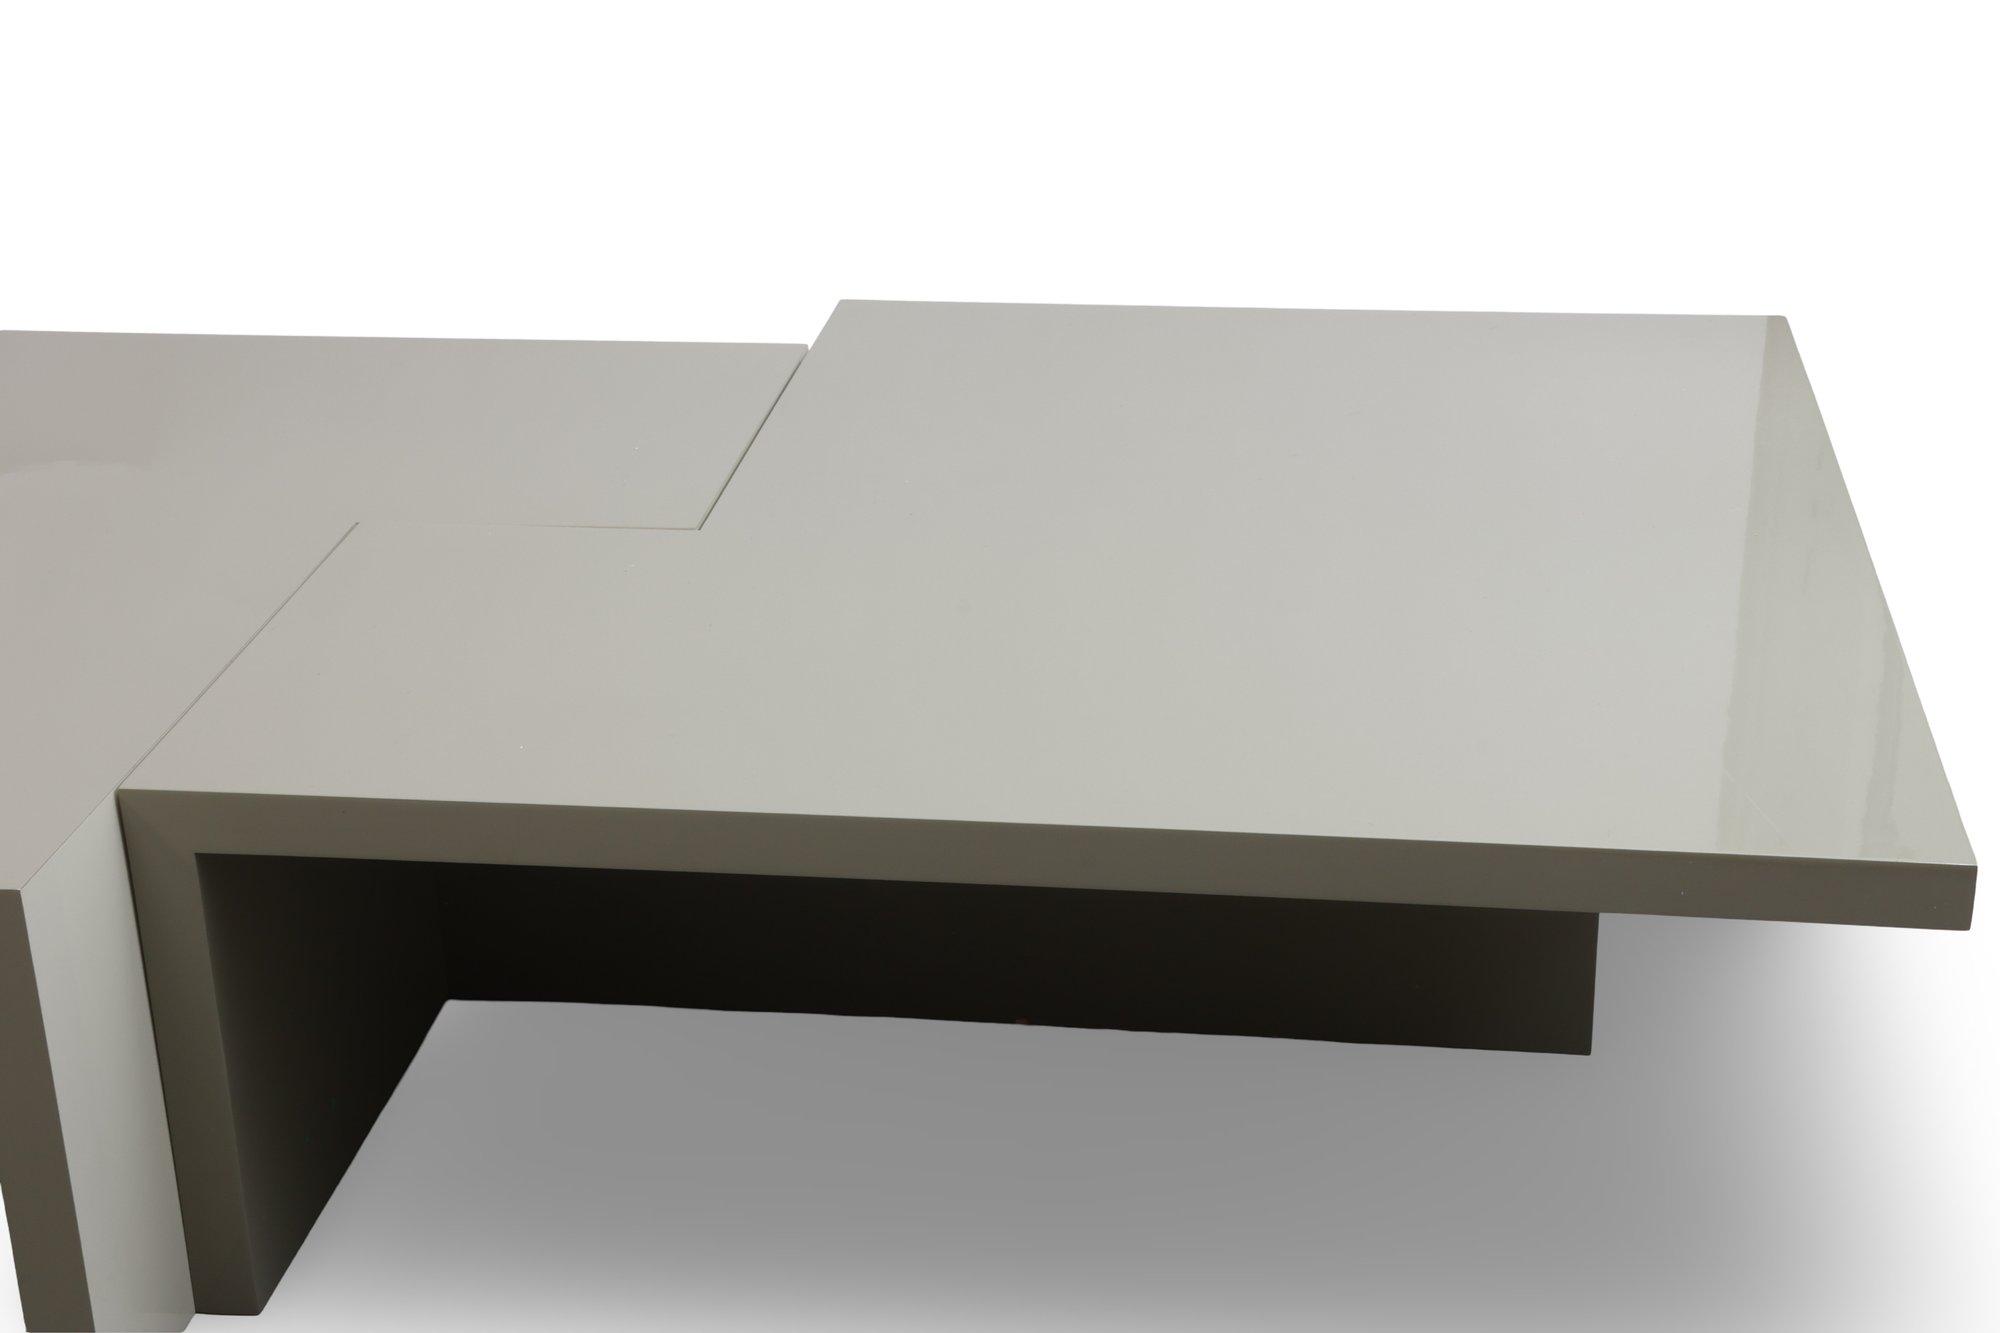 Oversized Modern Lacquer Interlocking Coffee Table